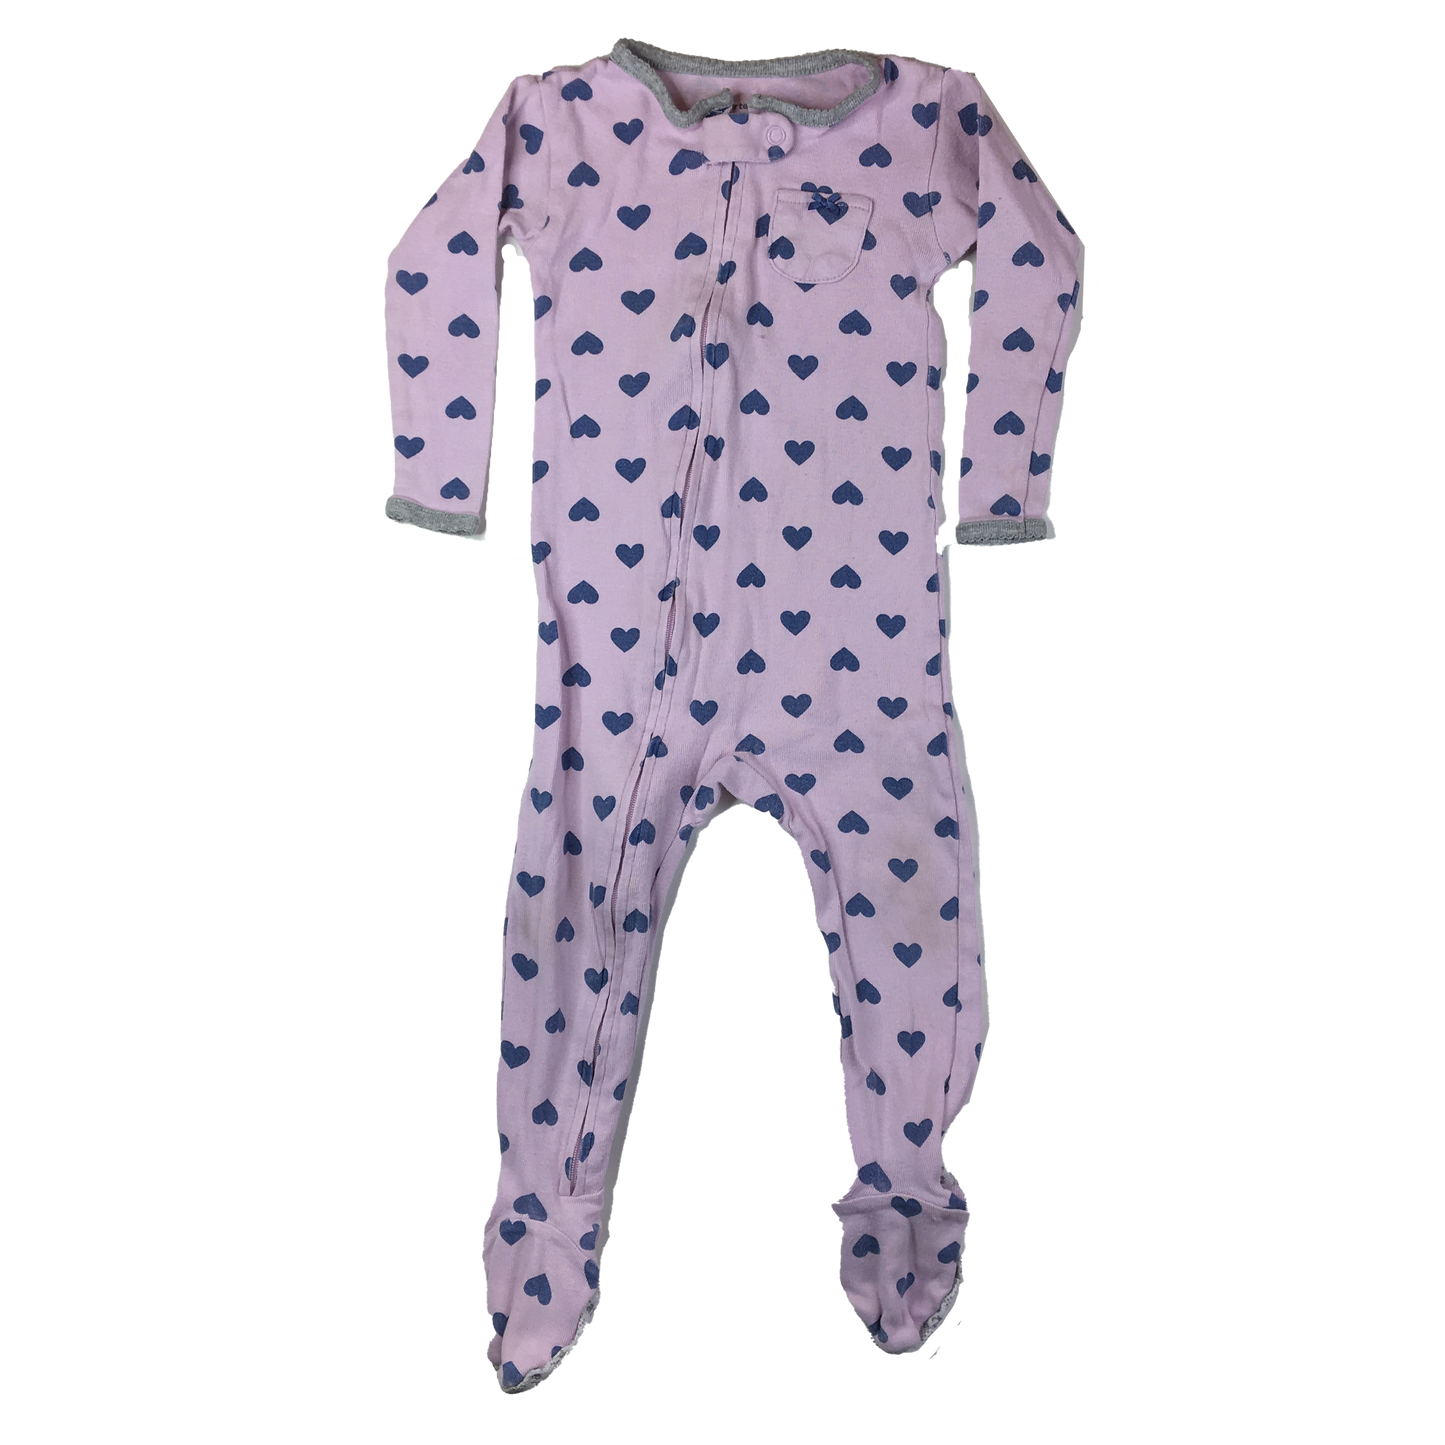 Carter's Purple Zipped Footed Sleeper with Hearts 18M